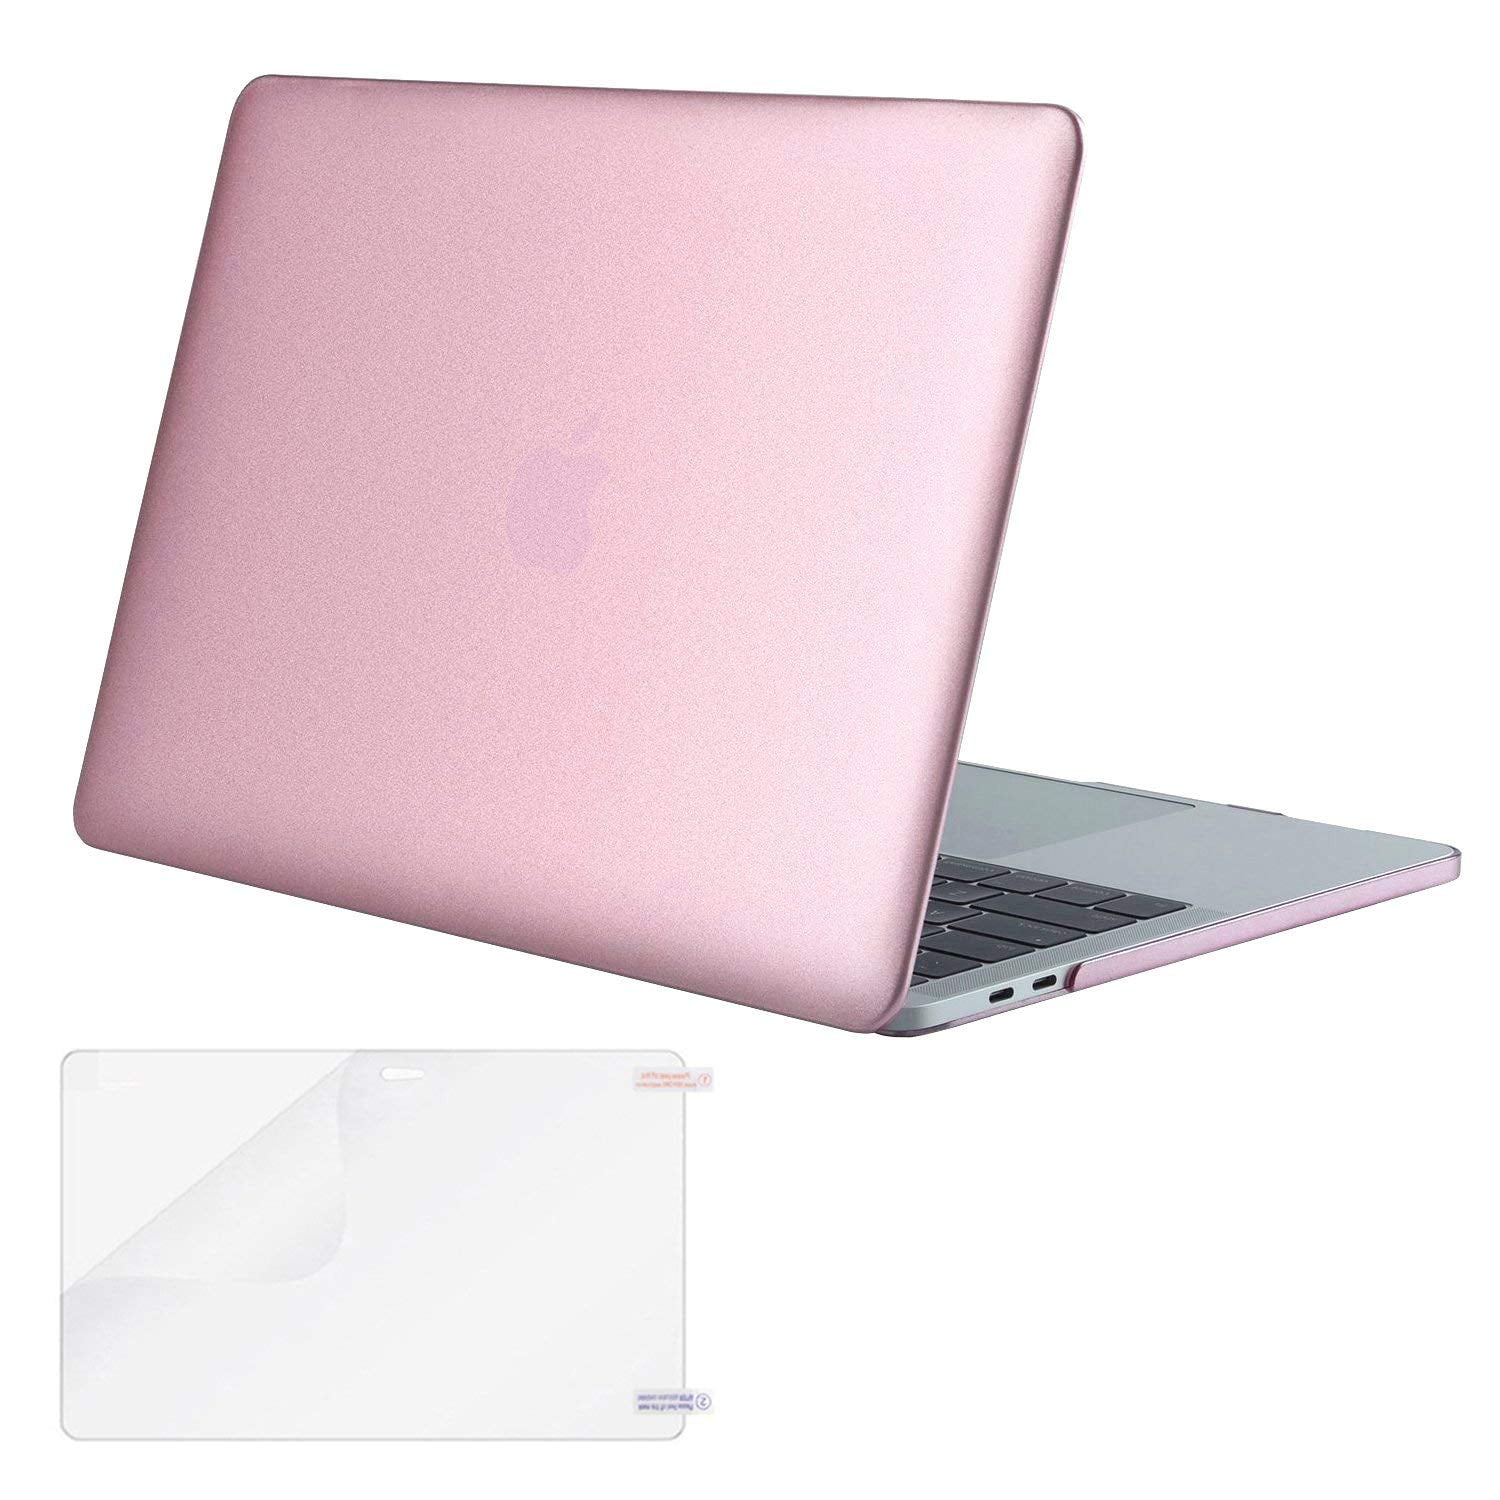 iLeadon MacBook New Pro 13 Case 2016-2019 Release A2159/A1989/A1706/A1708 Rubberized Hard Shell Case Cover+Keyboard Cover for MacBook Pro 13 W/Without Touch Bar & Touch ID Figure Painting 